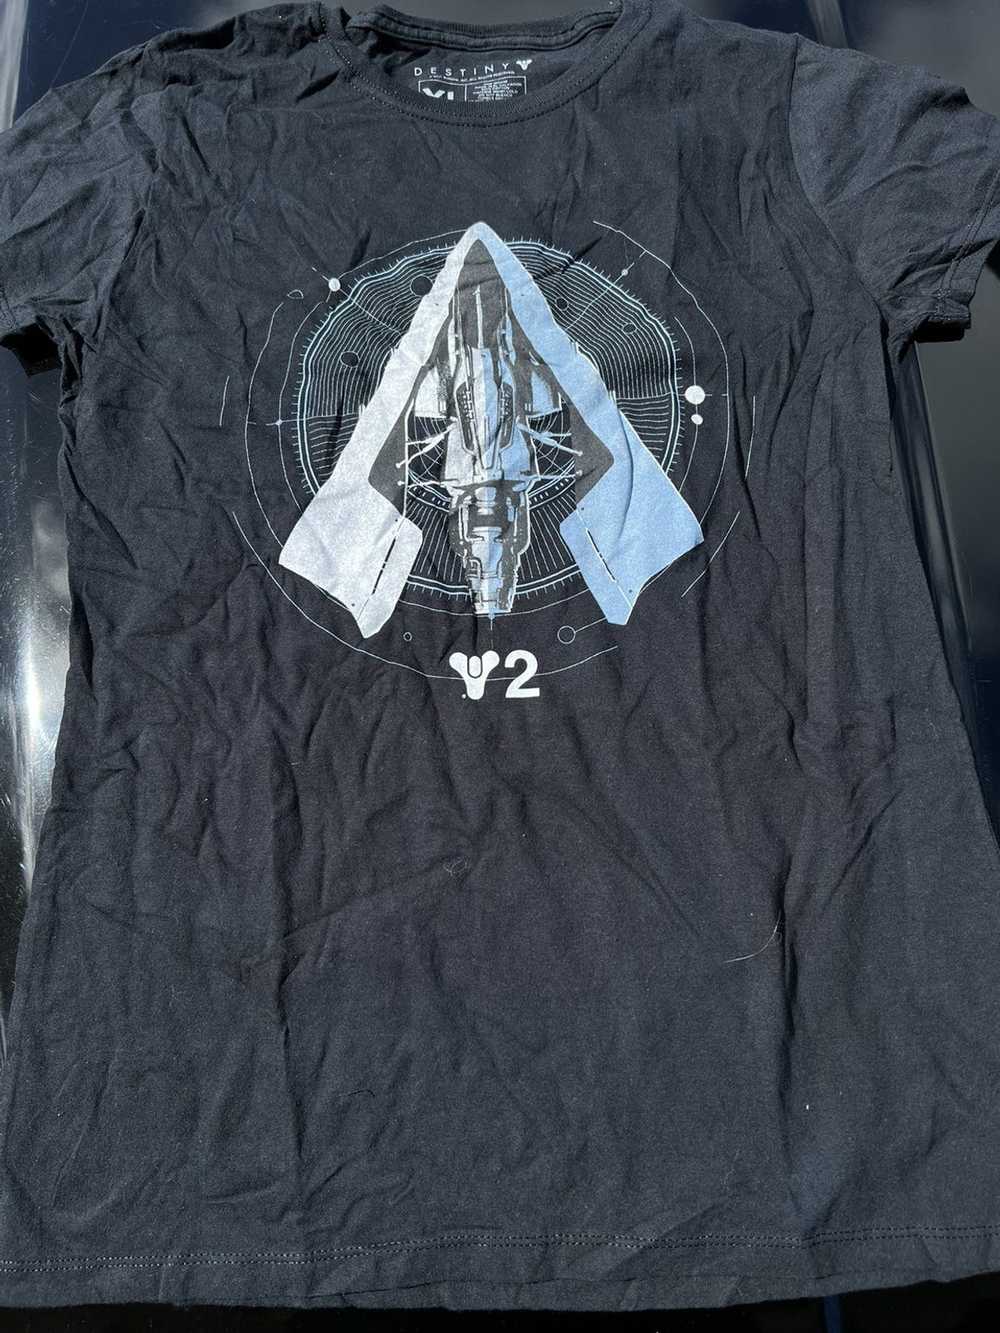 The Game Destiny 2 lootwear game promo tee - image 1